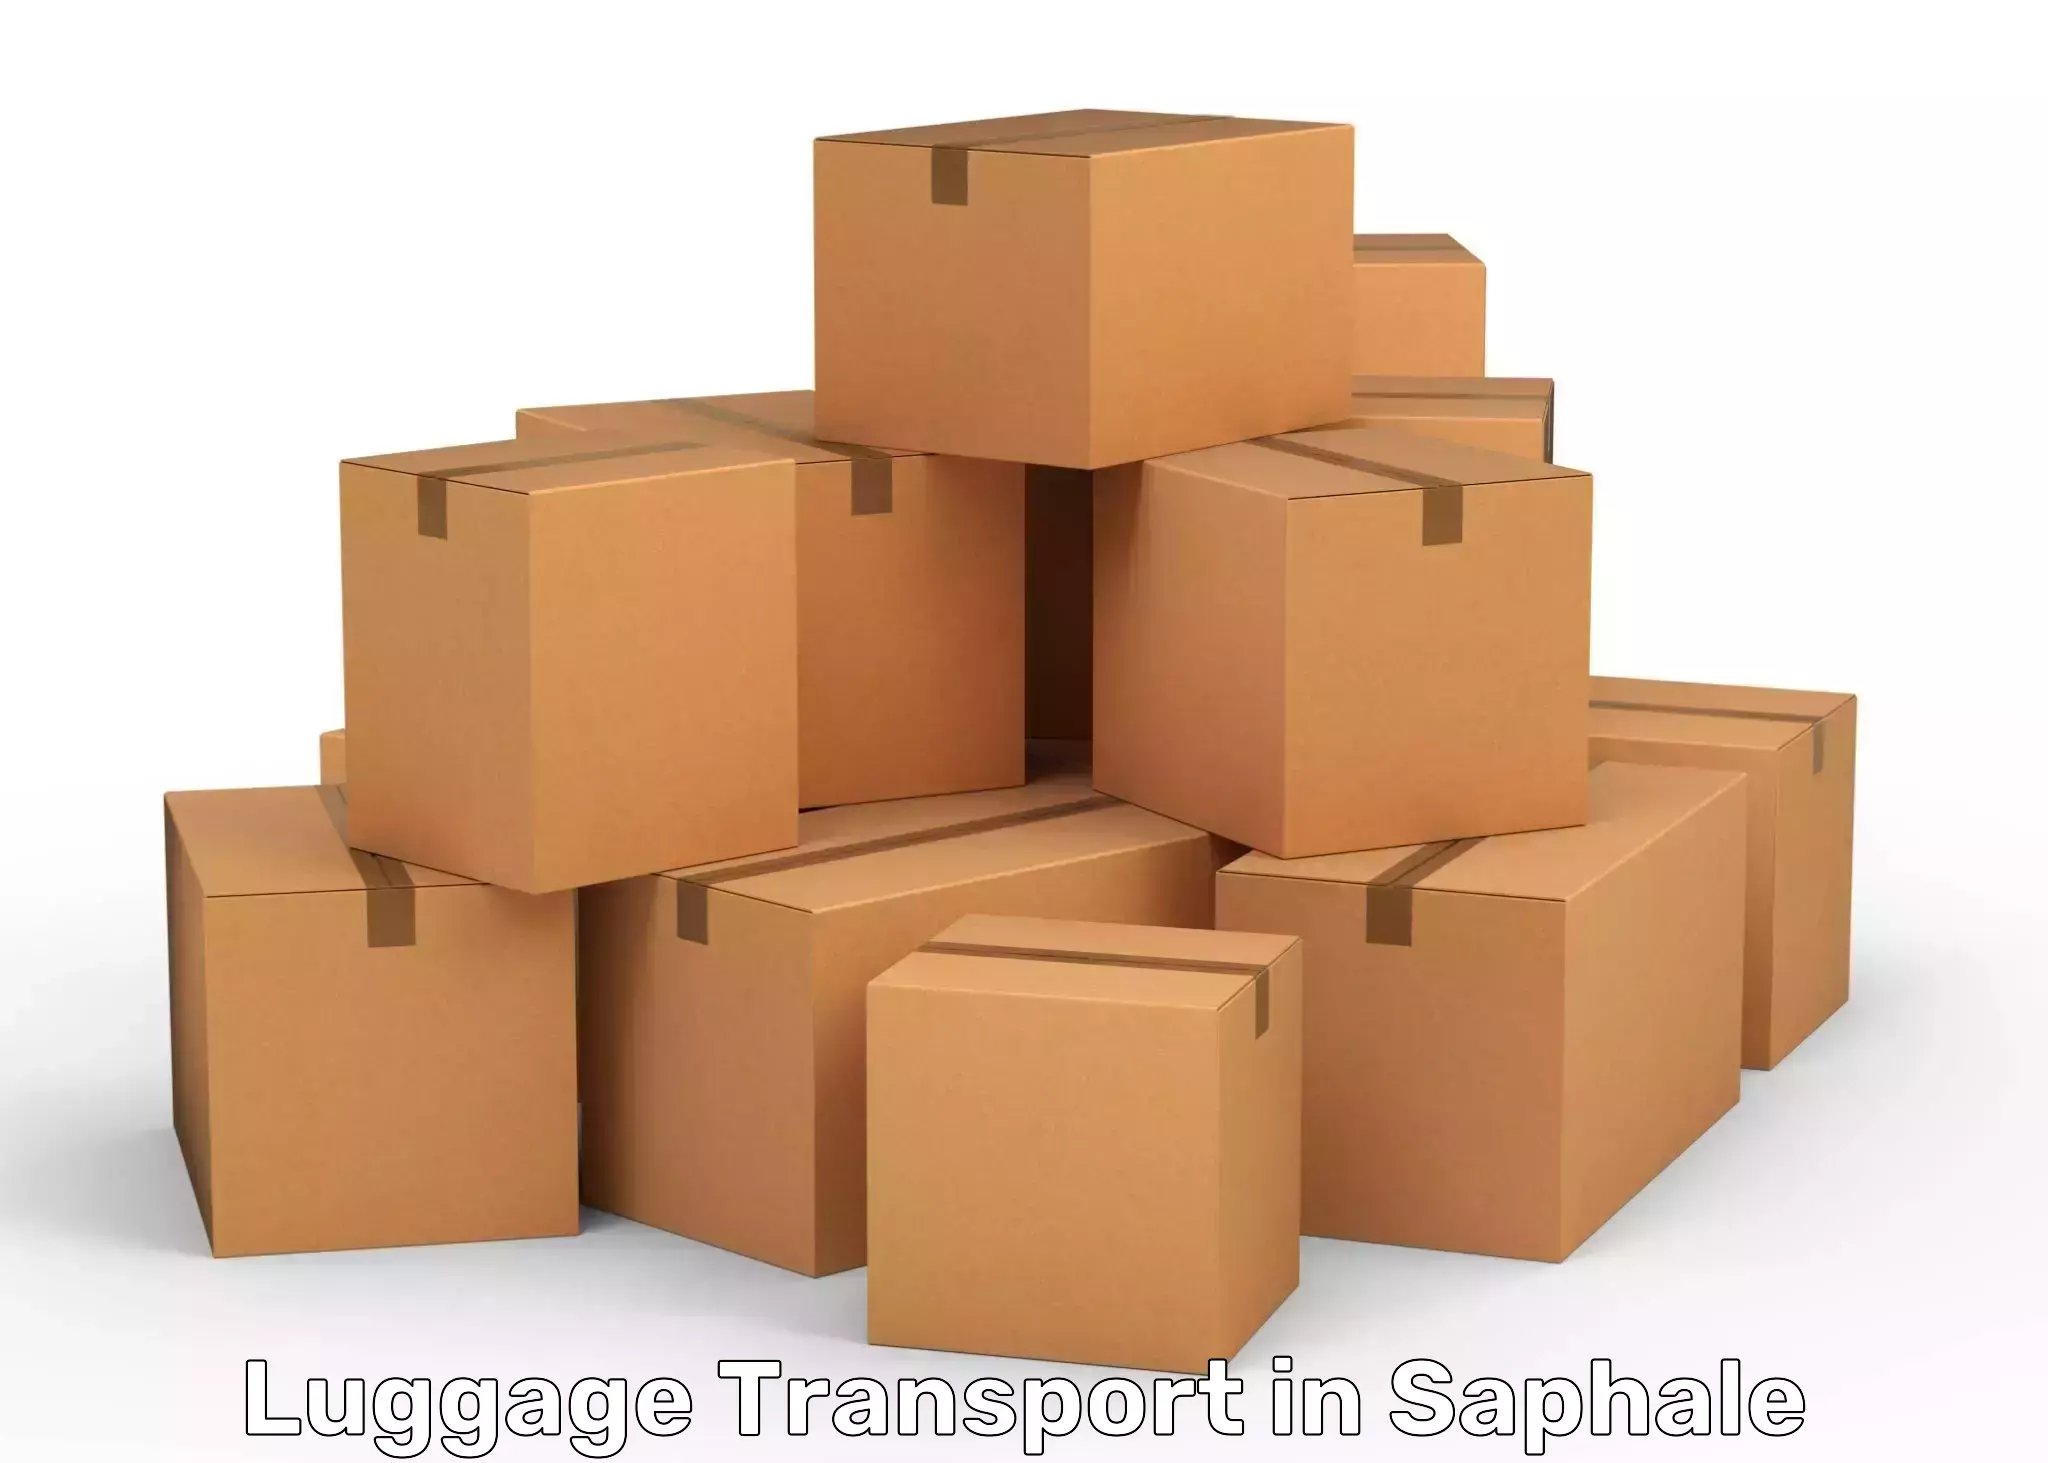 Express baggage shipping in Saphale